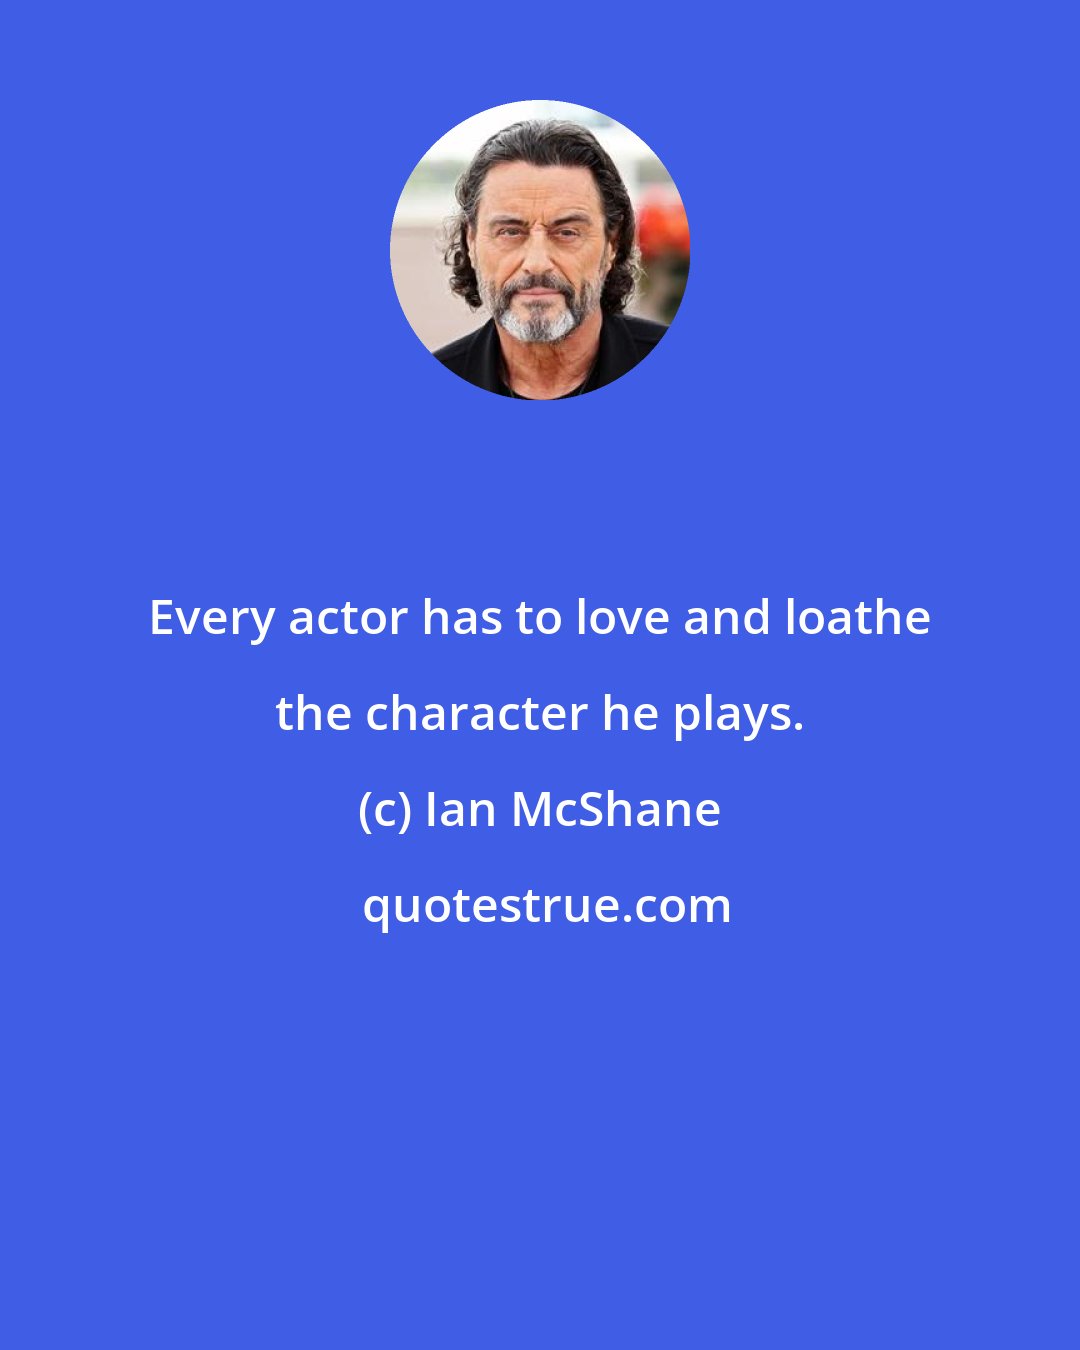 Ian McShane: Every actor has to love and loathe the character he plays.